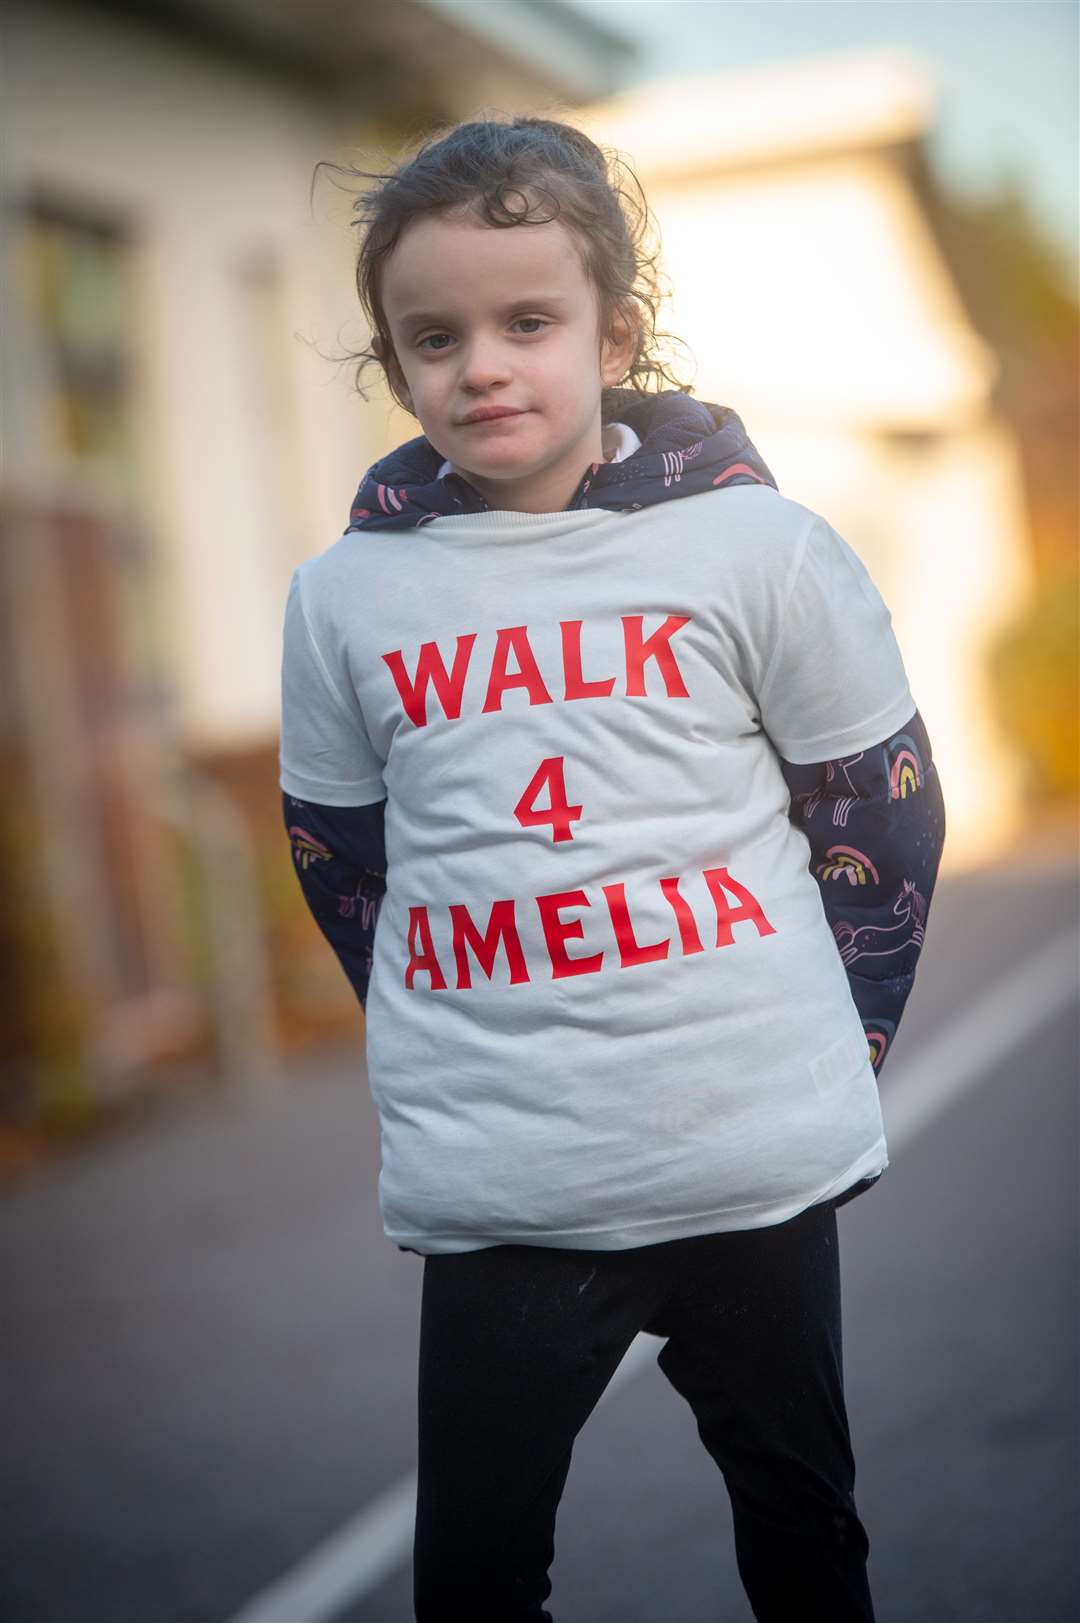 The aim is to get Amelia to London to see private consultants who have a track record of getting non-verbal children to speak.